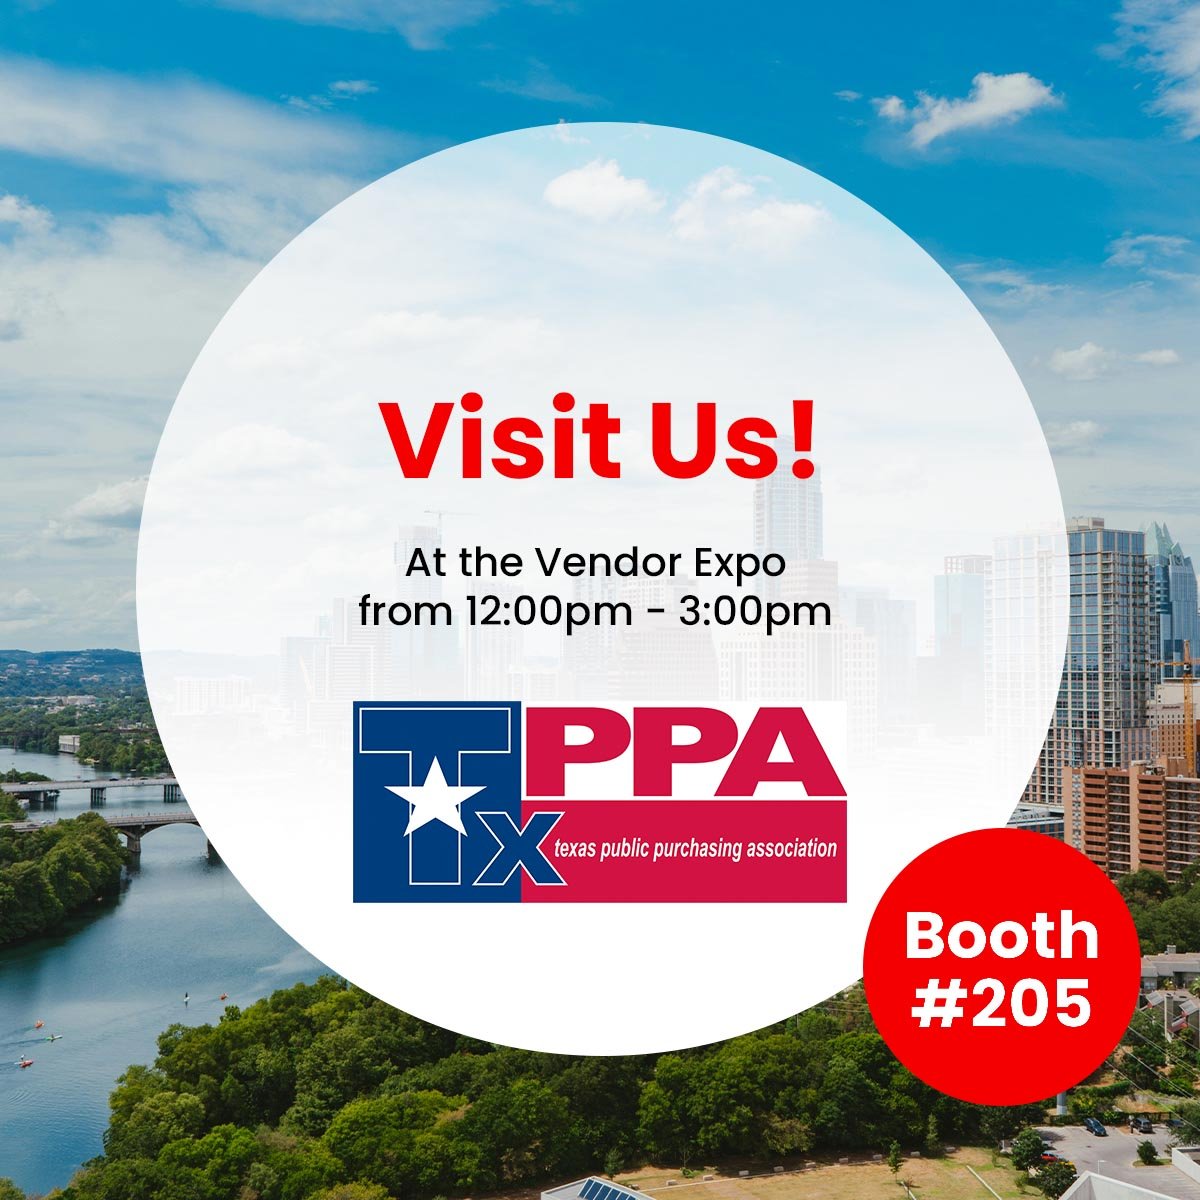 Join us today at booth #205 during the Vendor Expo at the TXPPA Spring Conference from 12:00pm to 3:00pm! Meet with our team and discover how you can efficiently start modernizing your procurement processes.  

bit.ly/3WrxoDT
#TXPPA #Texas #publicprocurement